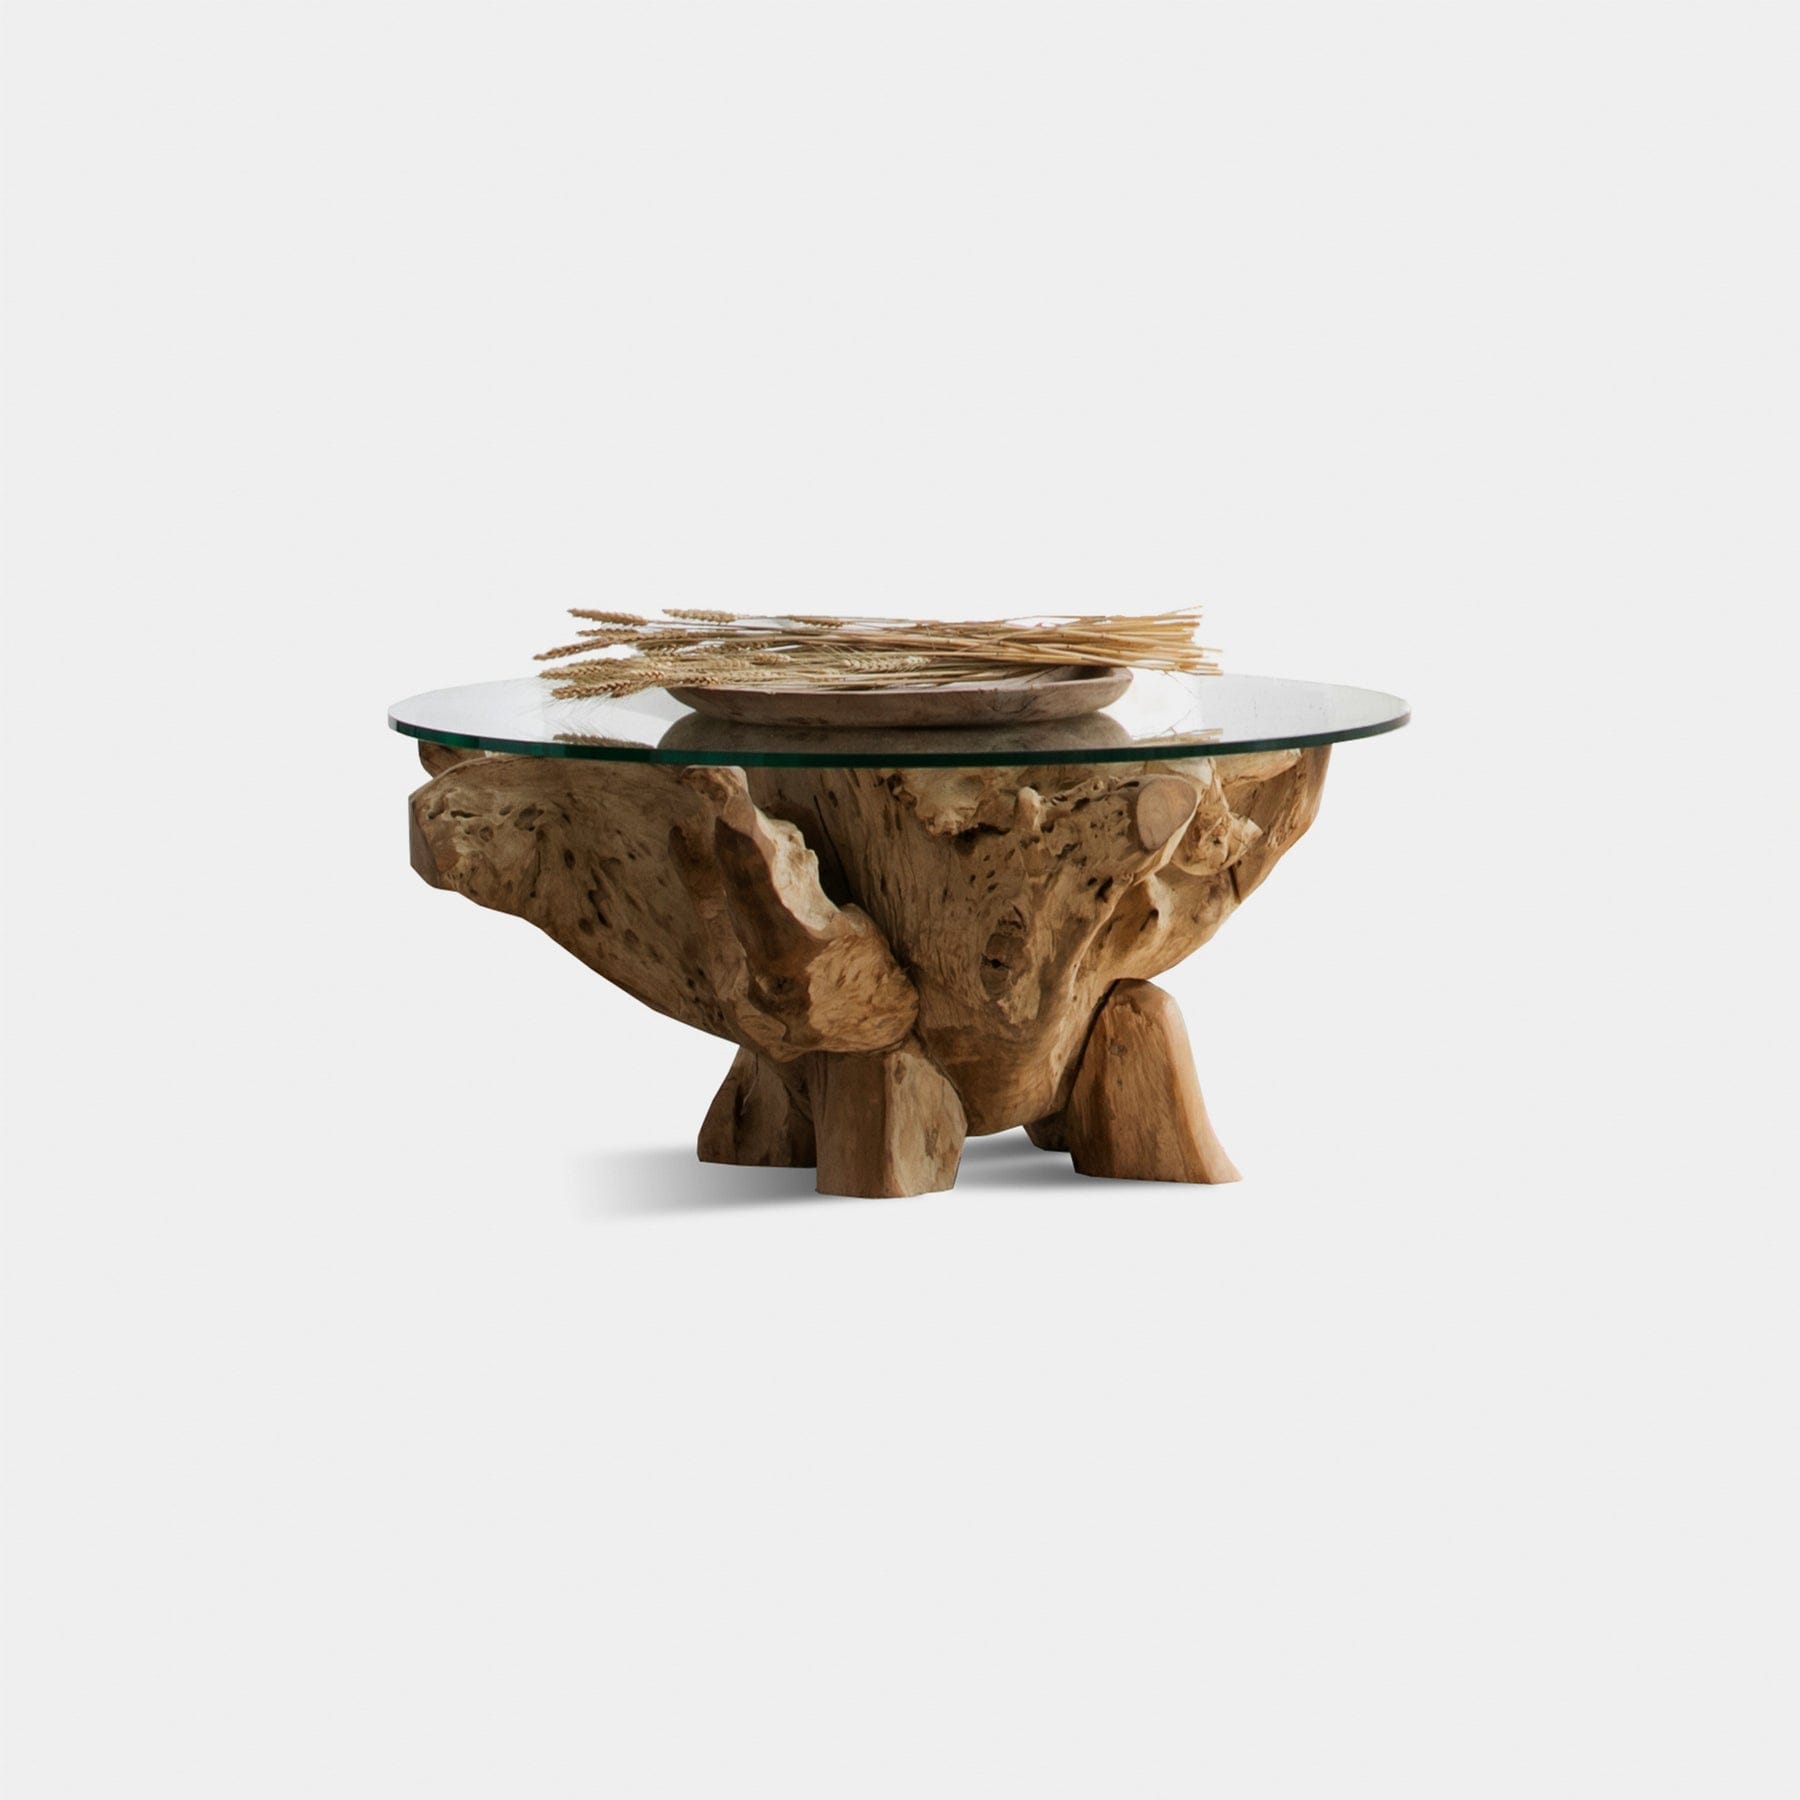 PURE ROOT COFFEE TABLE 800. Teak root base with glass top. Width (in)	39.25 Depth (in)	31.5 Height (in)	15.7 Weight (lb)	127.9